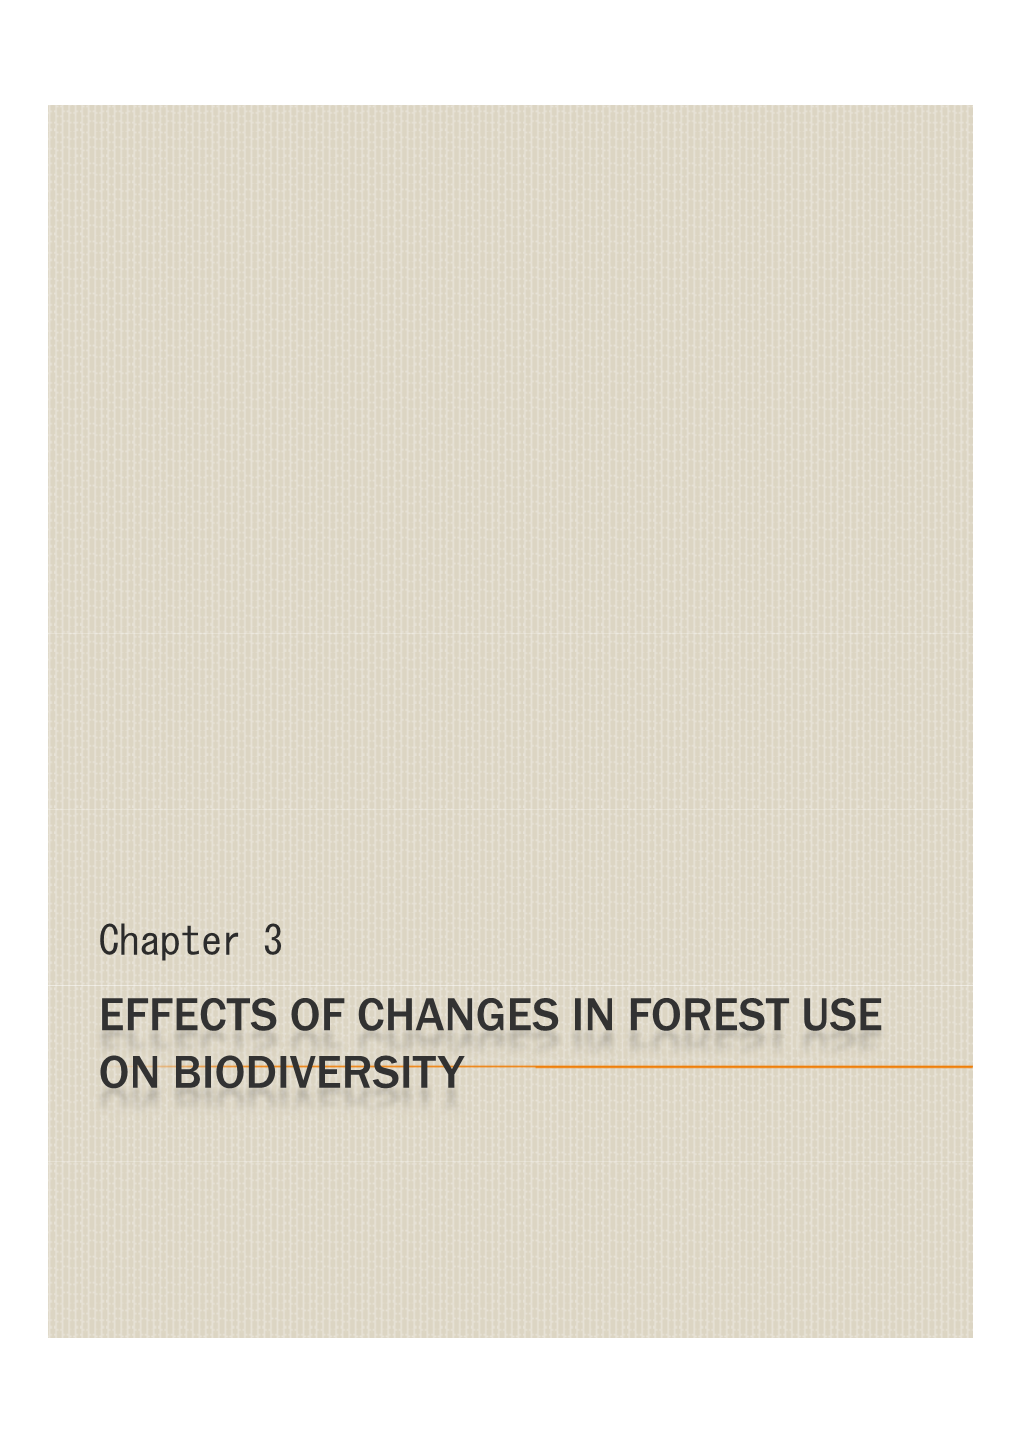 Effects of Changes in Forest Use on Biodiversity 3